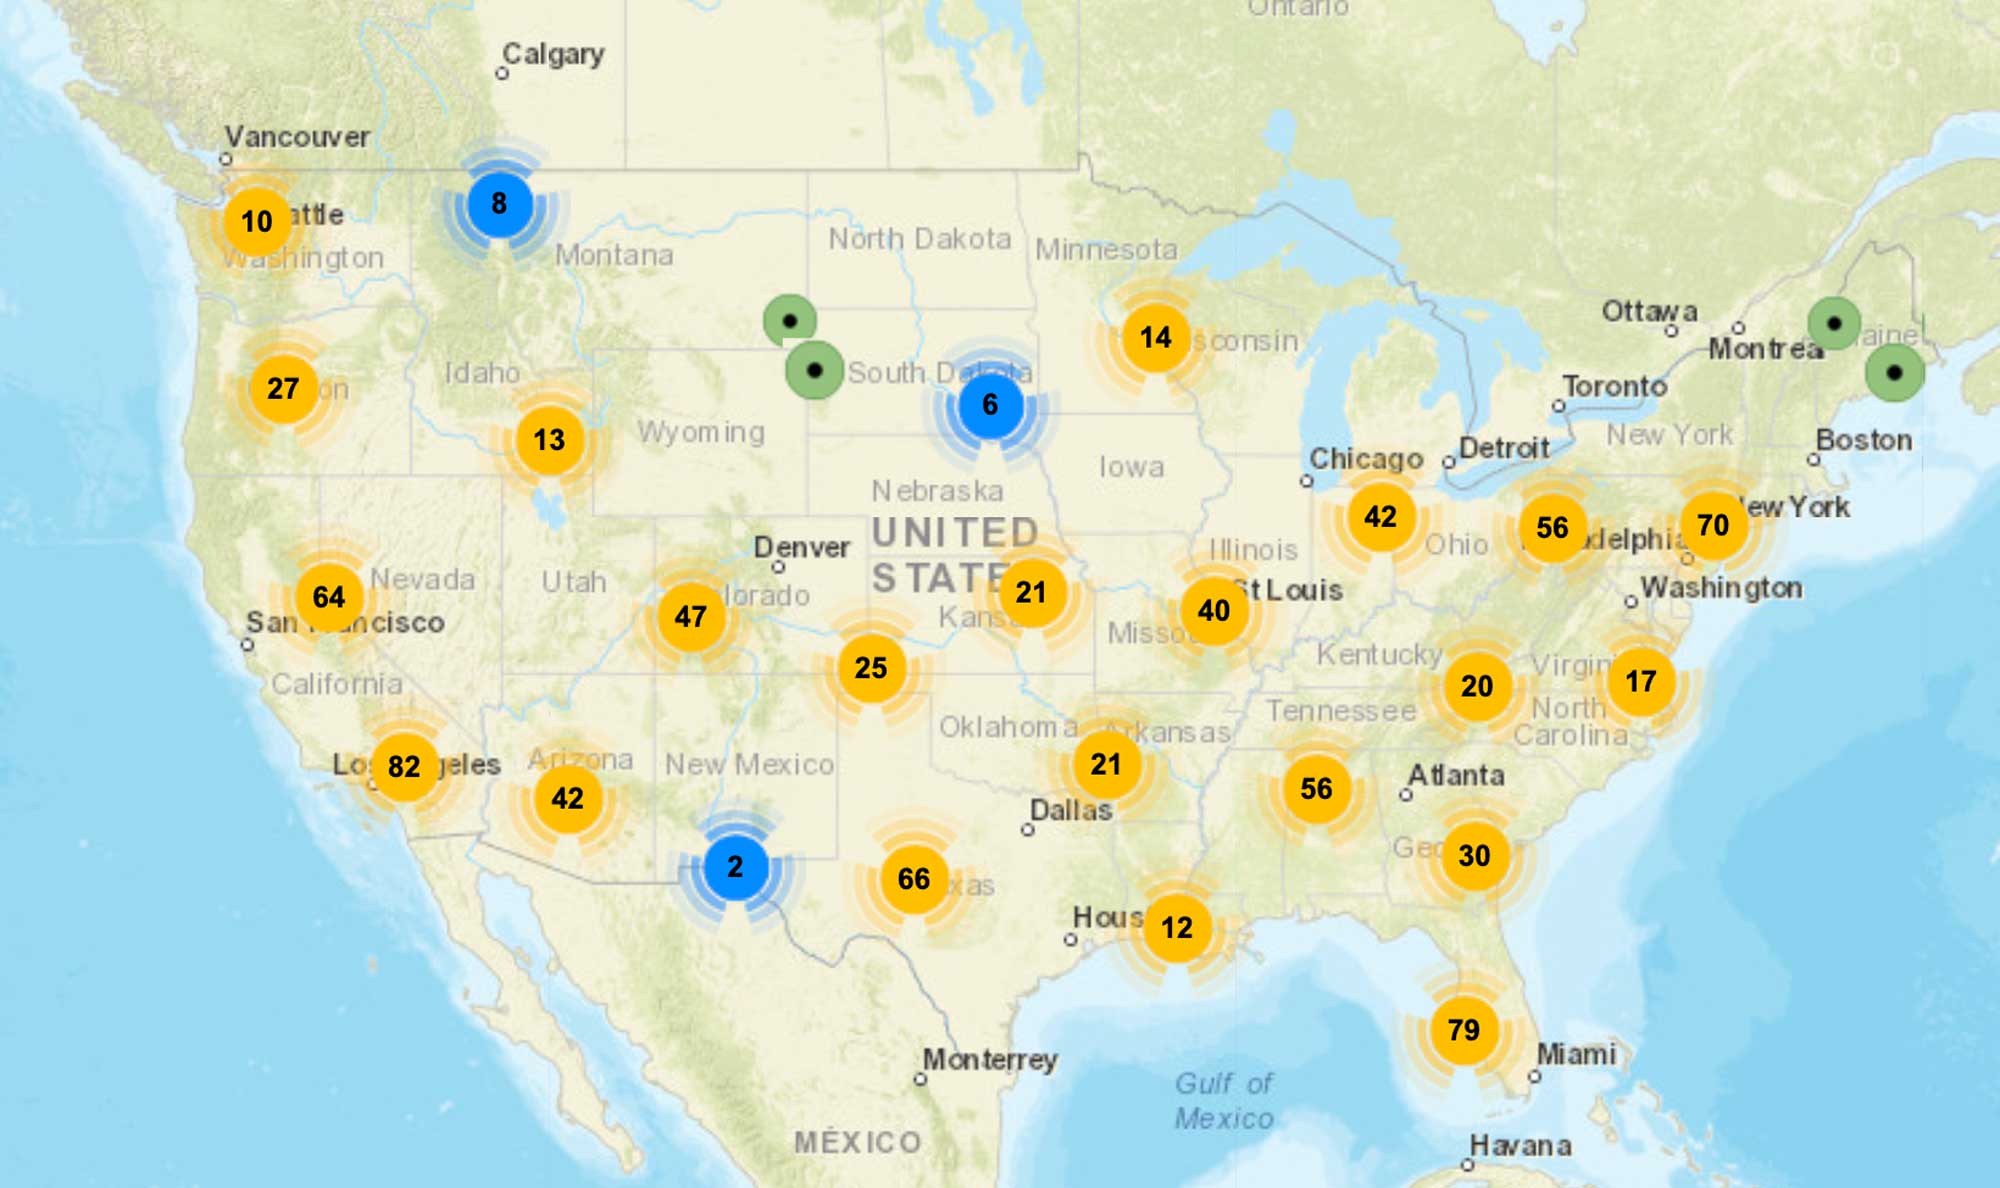 A map displaying the flight schools near major cities in the United States